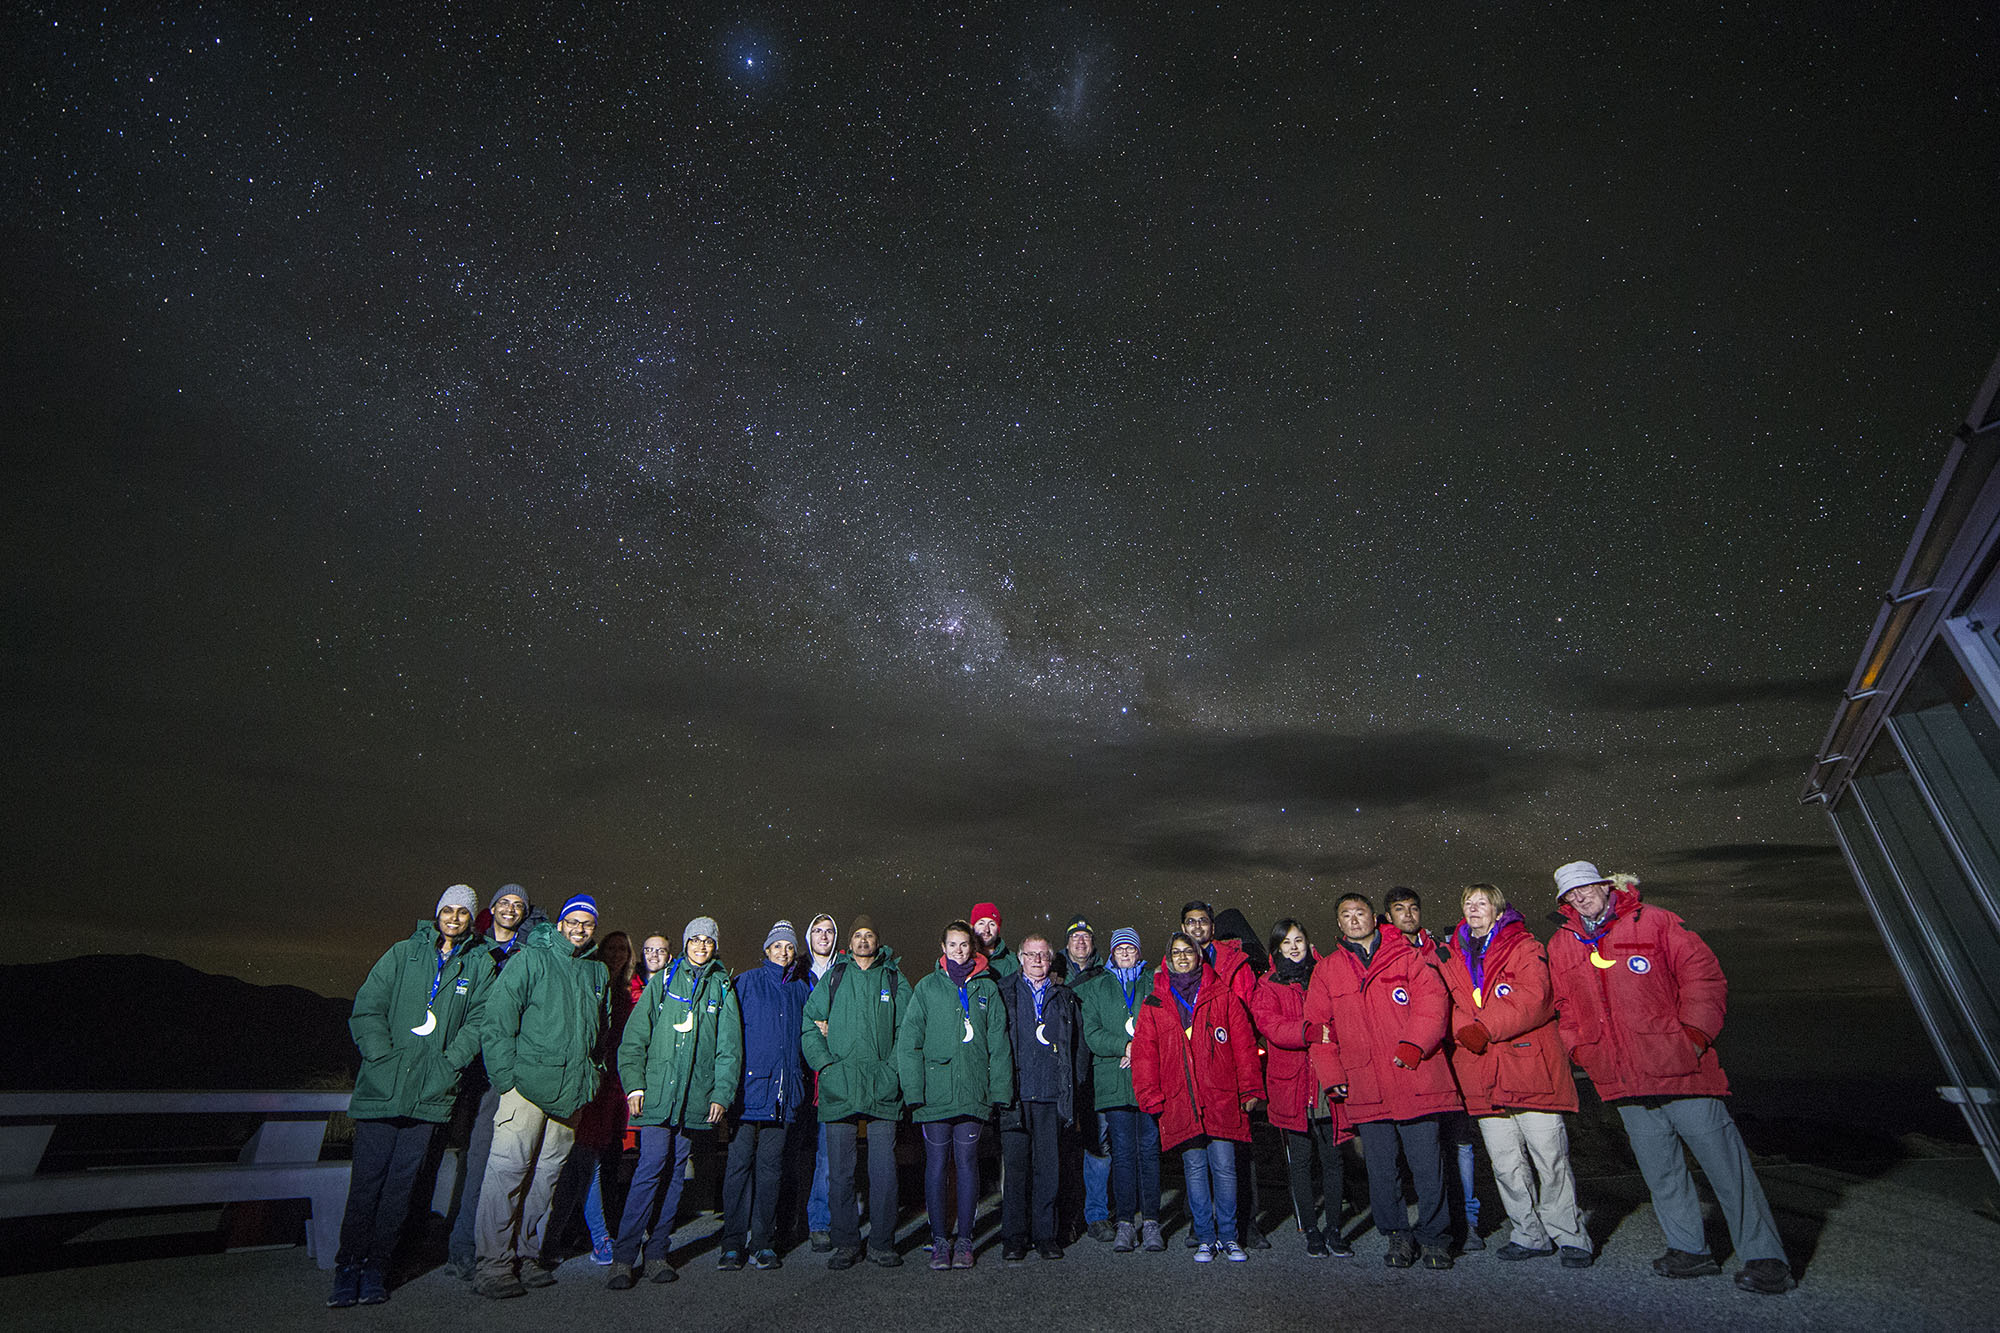 At the Mt. John Observatory. Me in the center with the headlamp. Southern Cross and Magellanic Clouds overhead. 